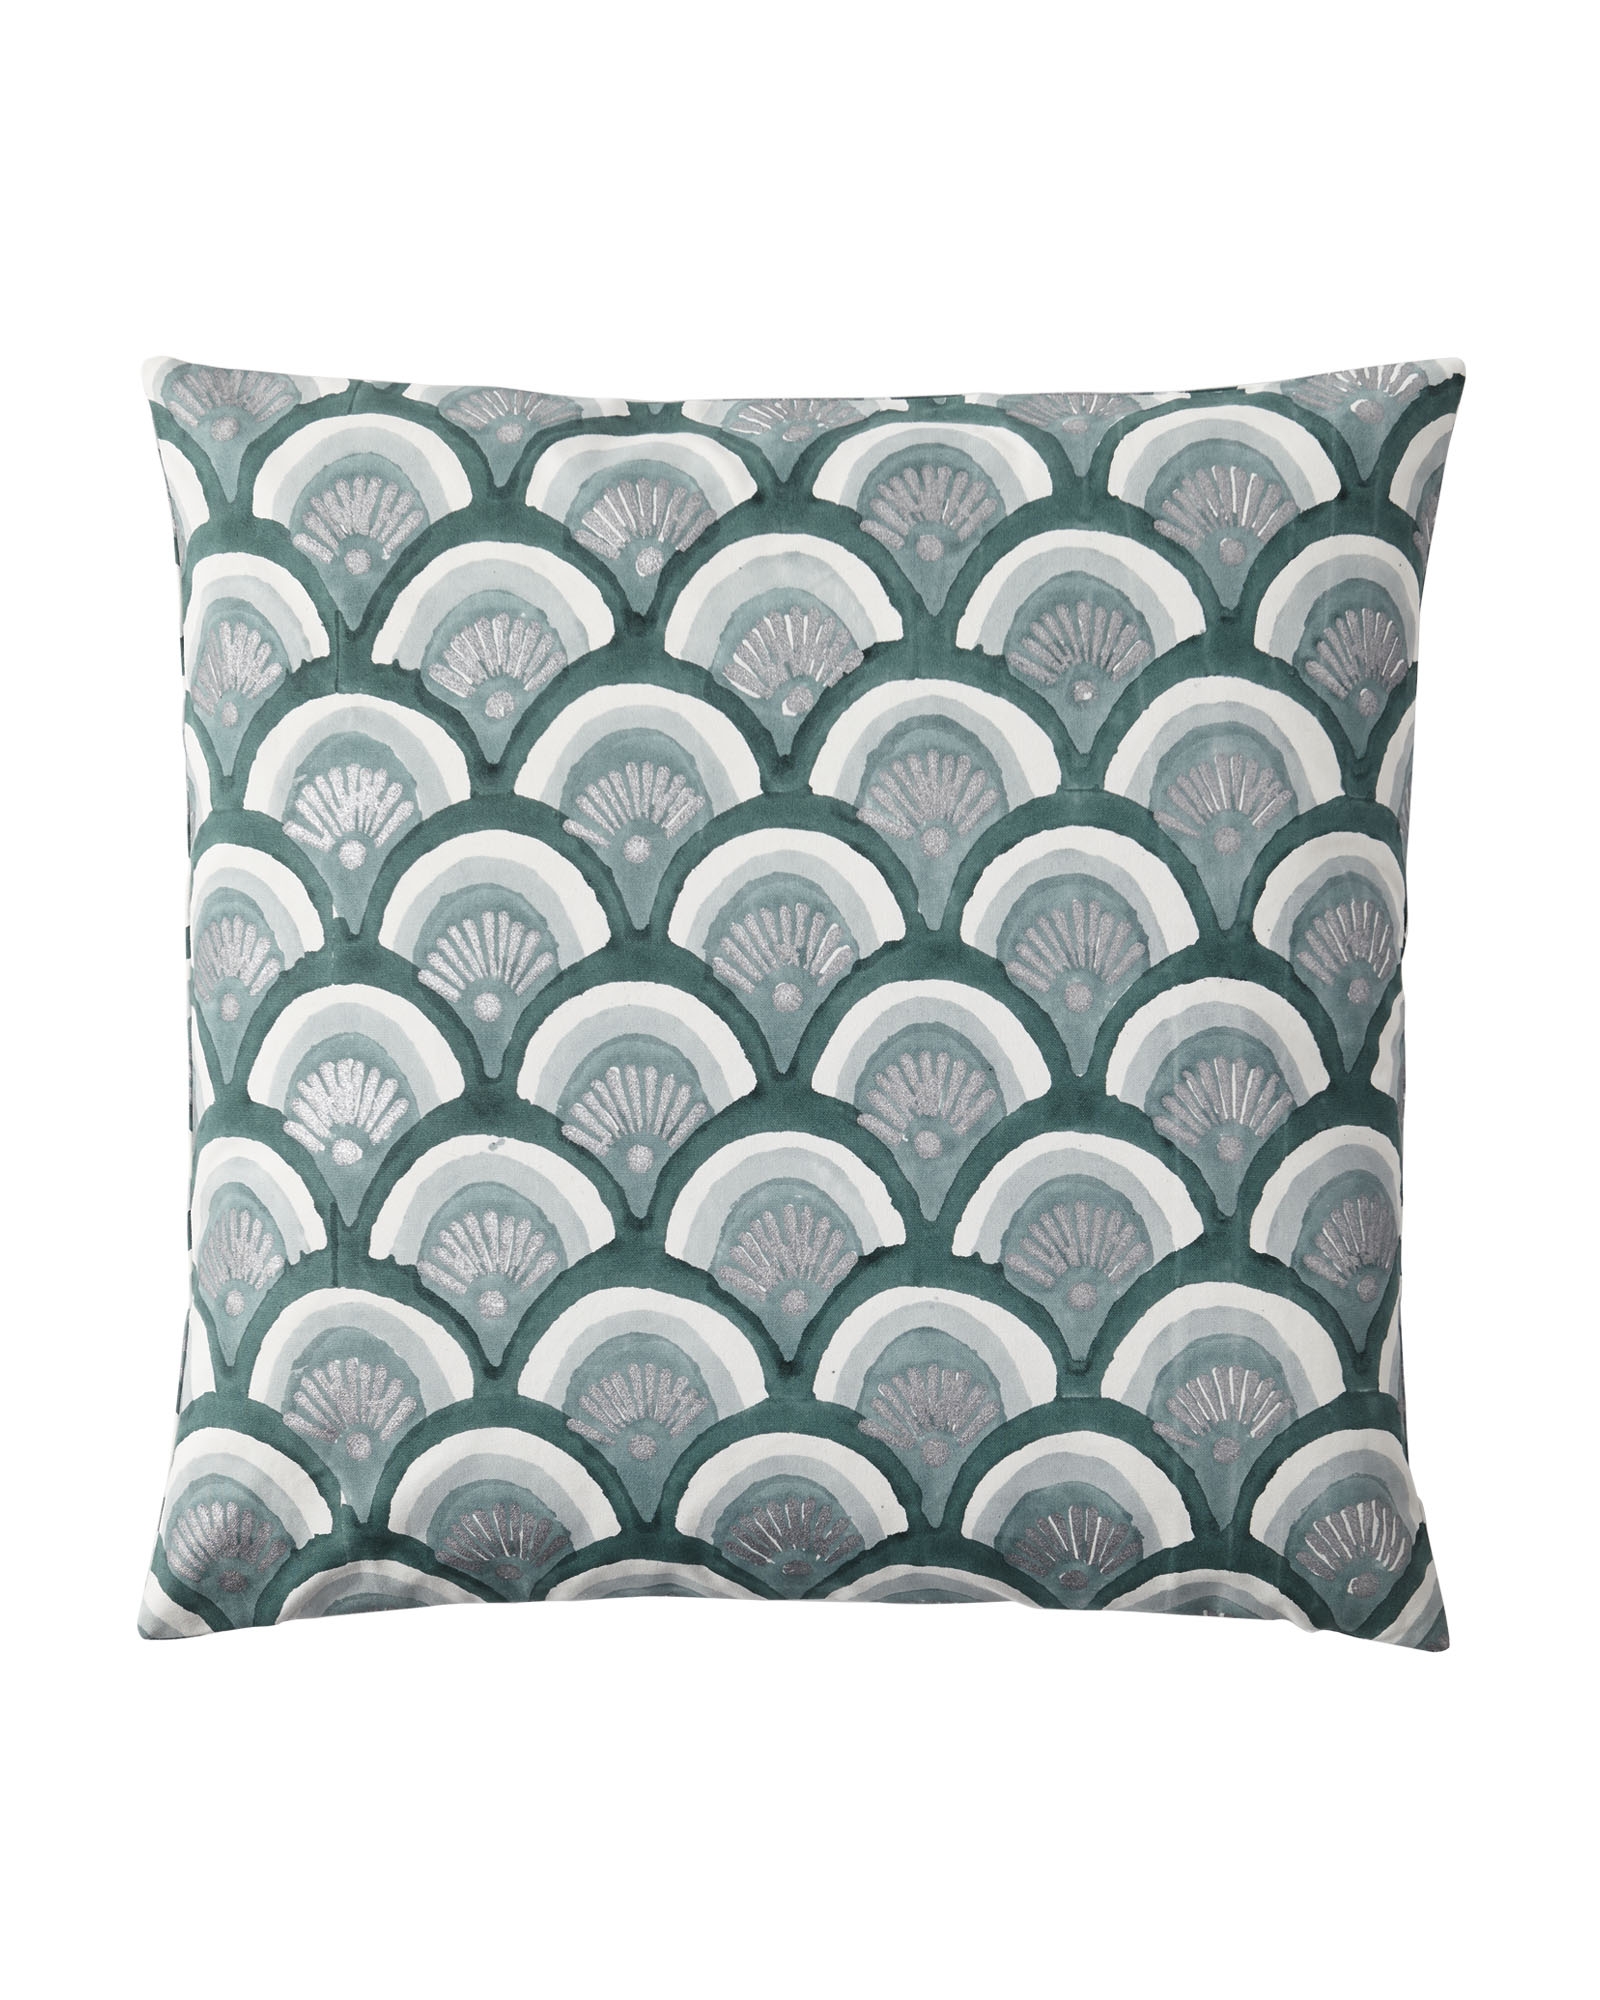 Kyoto Pillow Cover - Jade, 20" x 20" - Image 0